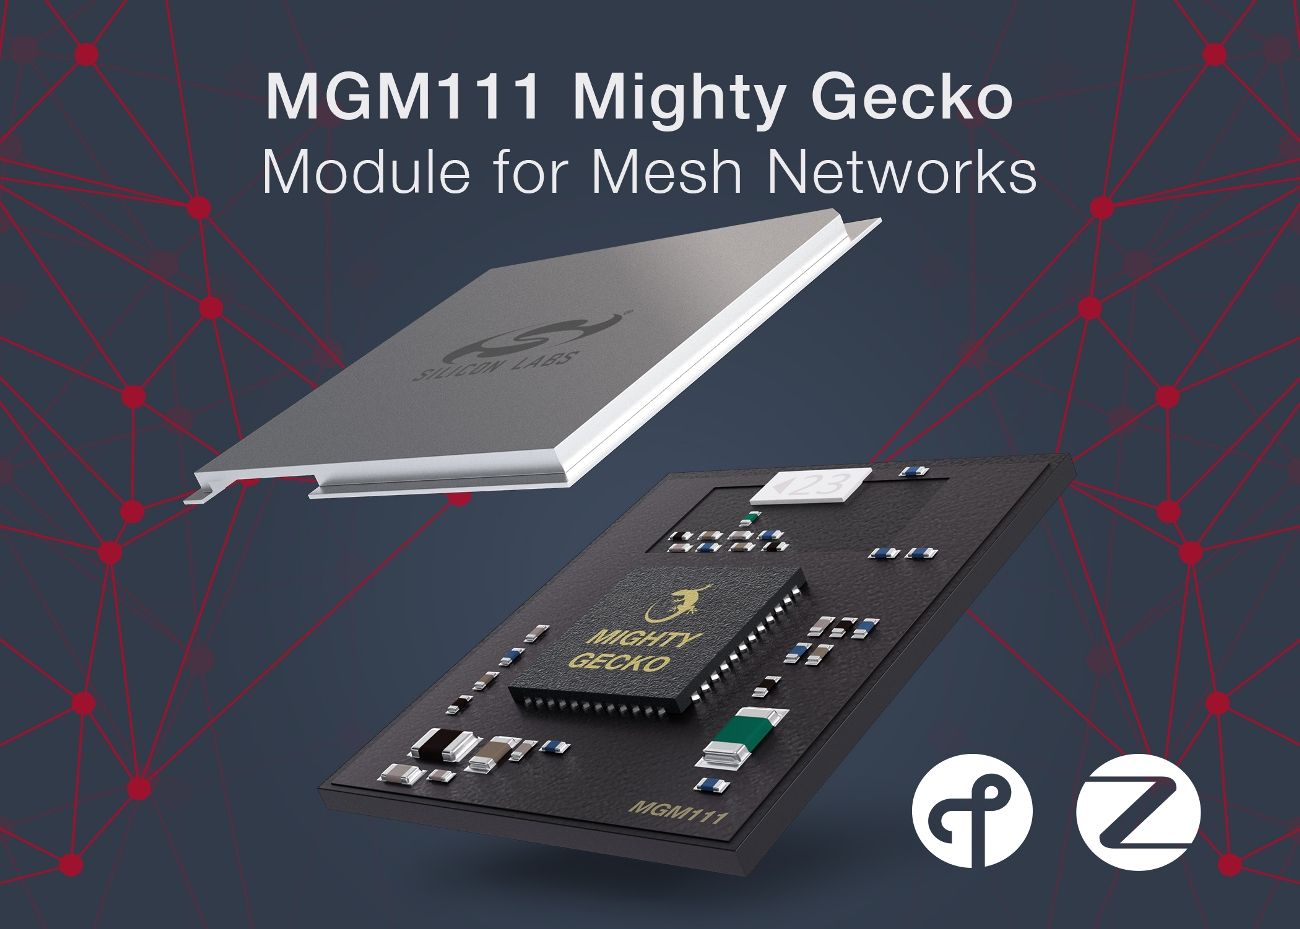 Silicon Labs MGM111 Mighty Geckoģ